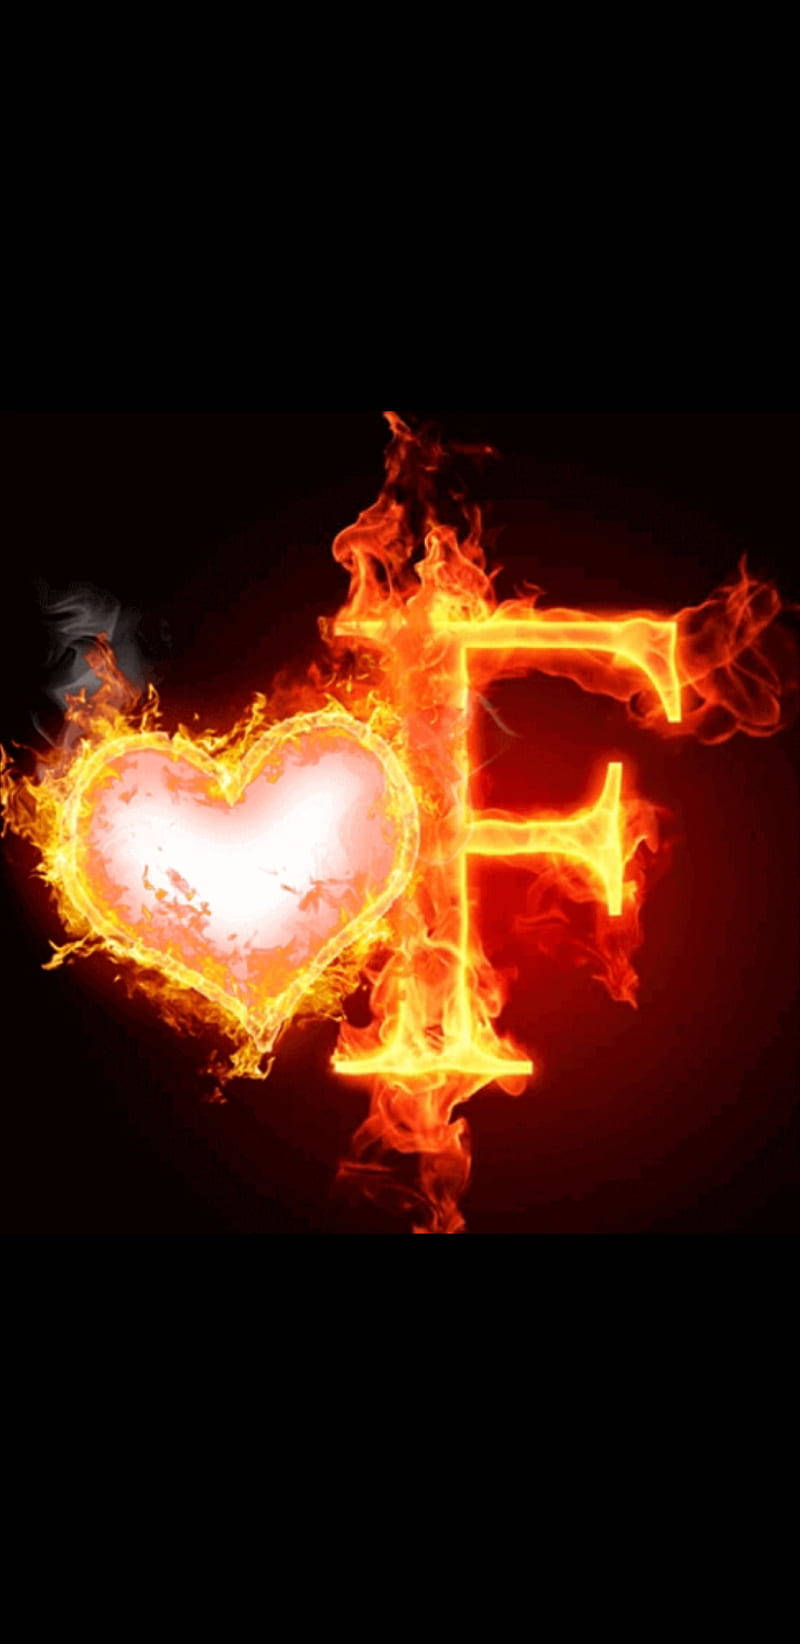 Letter F And Heart On Fire Background